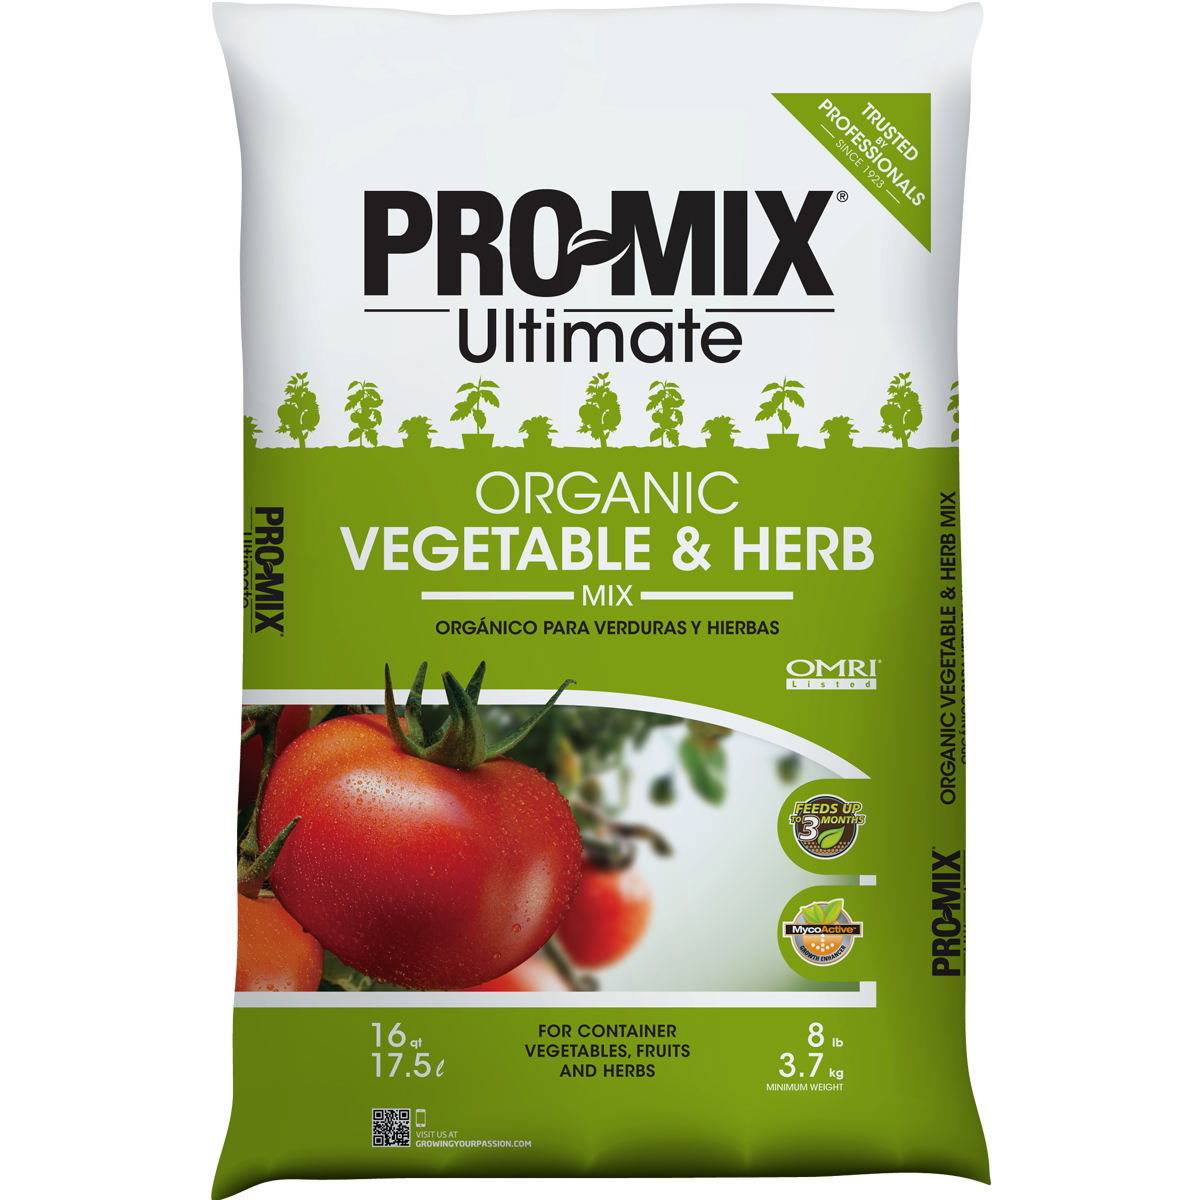 PRO-MIX Organic Vegetable and Herb Mix